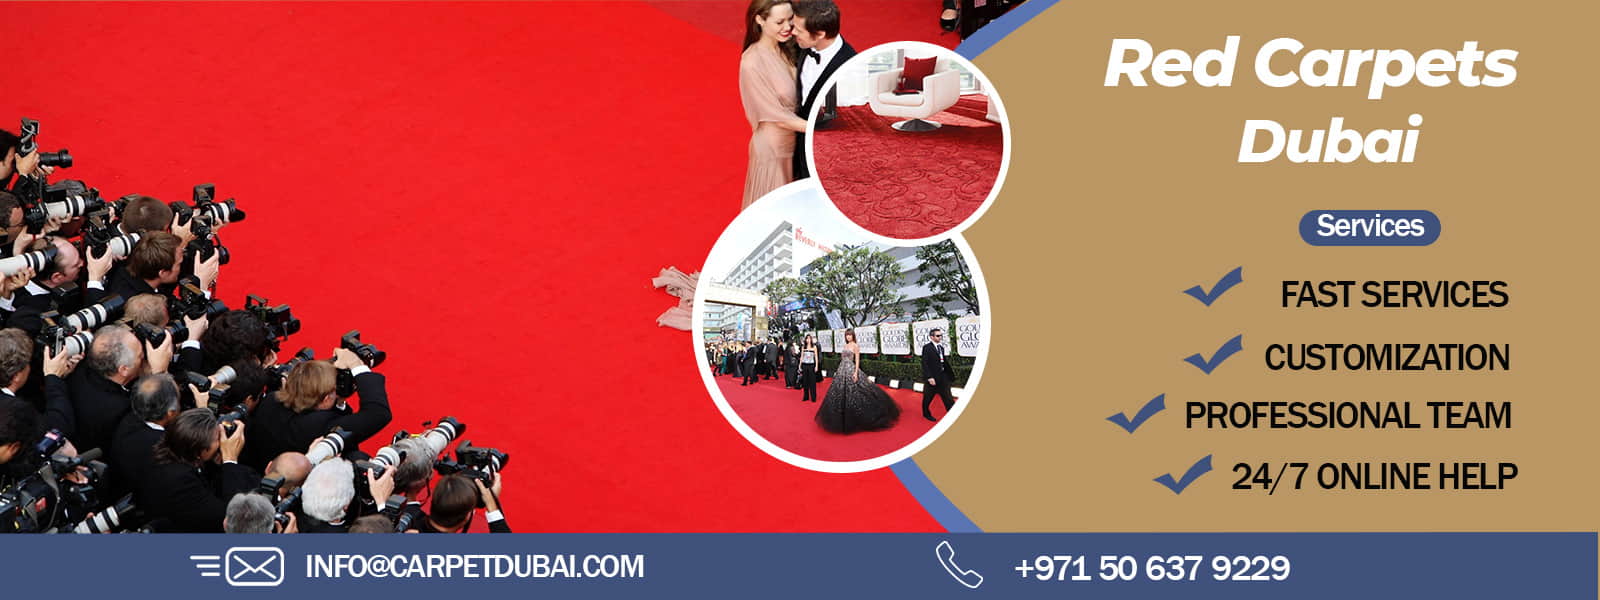 Red-Carpets-banner